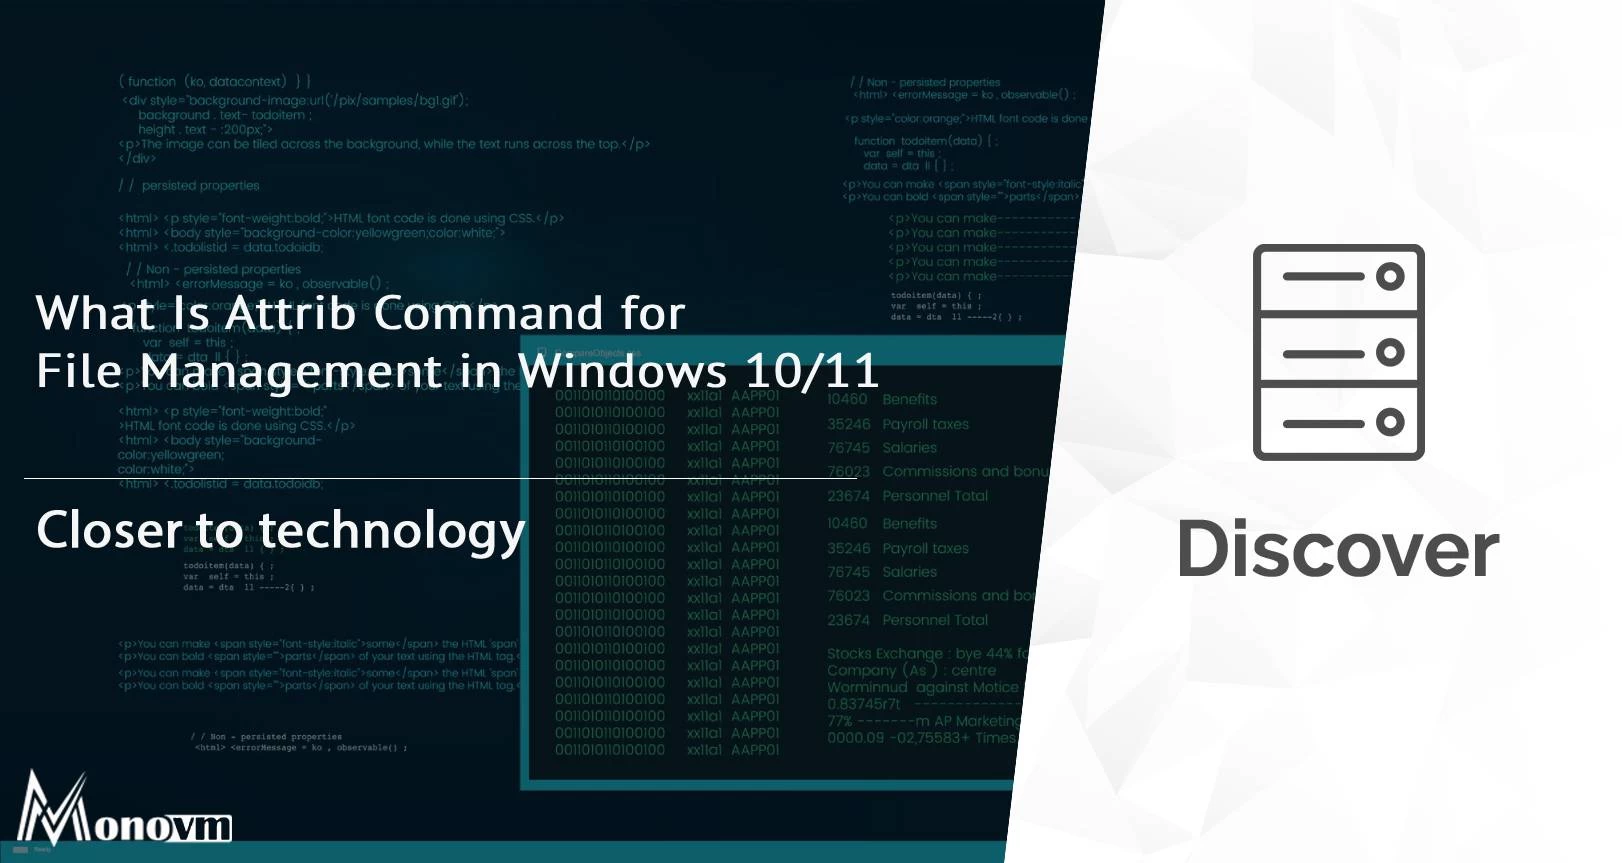 What Is Attrib Command for File Management in Windows 10/11